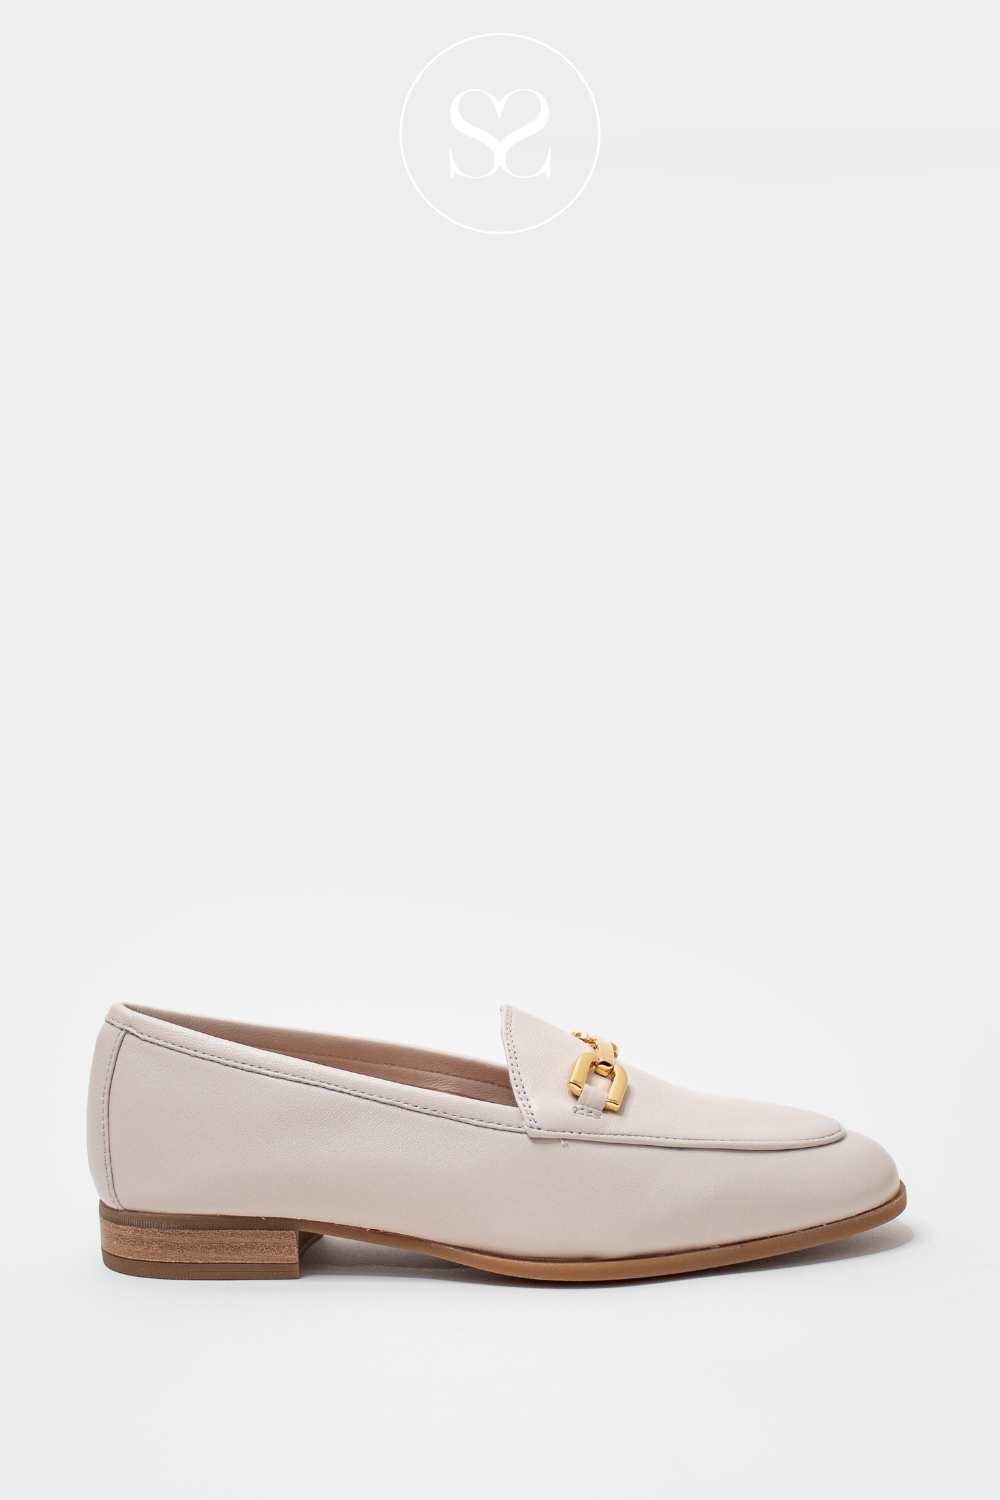 UNISA DALCY IVORY LEATHER FLAT SLIP ON LOAFERS WITH GOLD BUCKLE